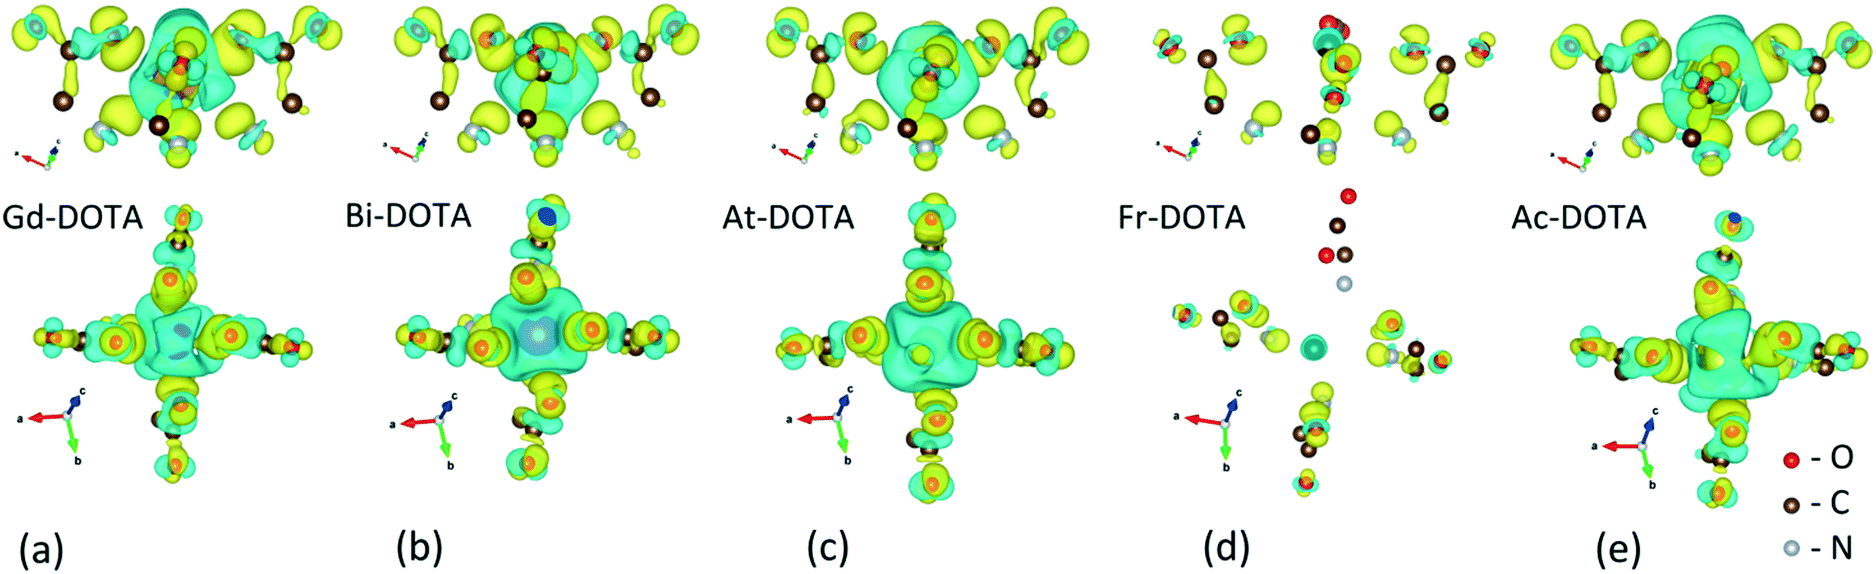 Structure and properties of DOTA-chelated radiopharmaceuticals within the  225 Ac decay pathway - MedChemComm (RSC Publishing) DOI:10.1039/C8MD00170G